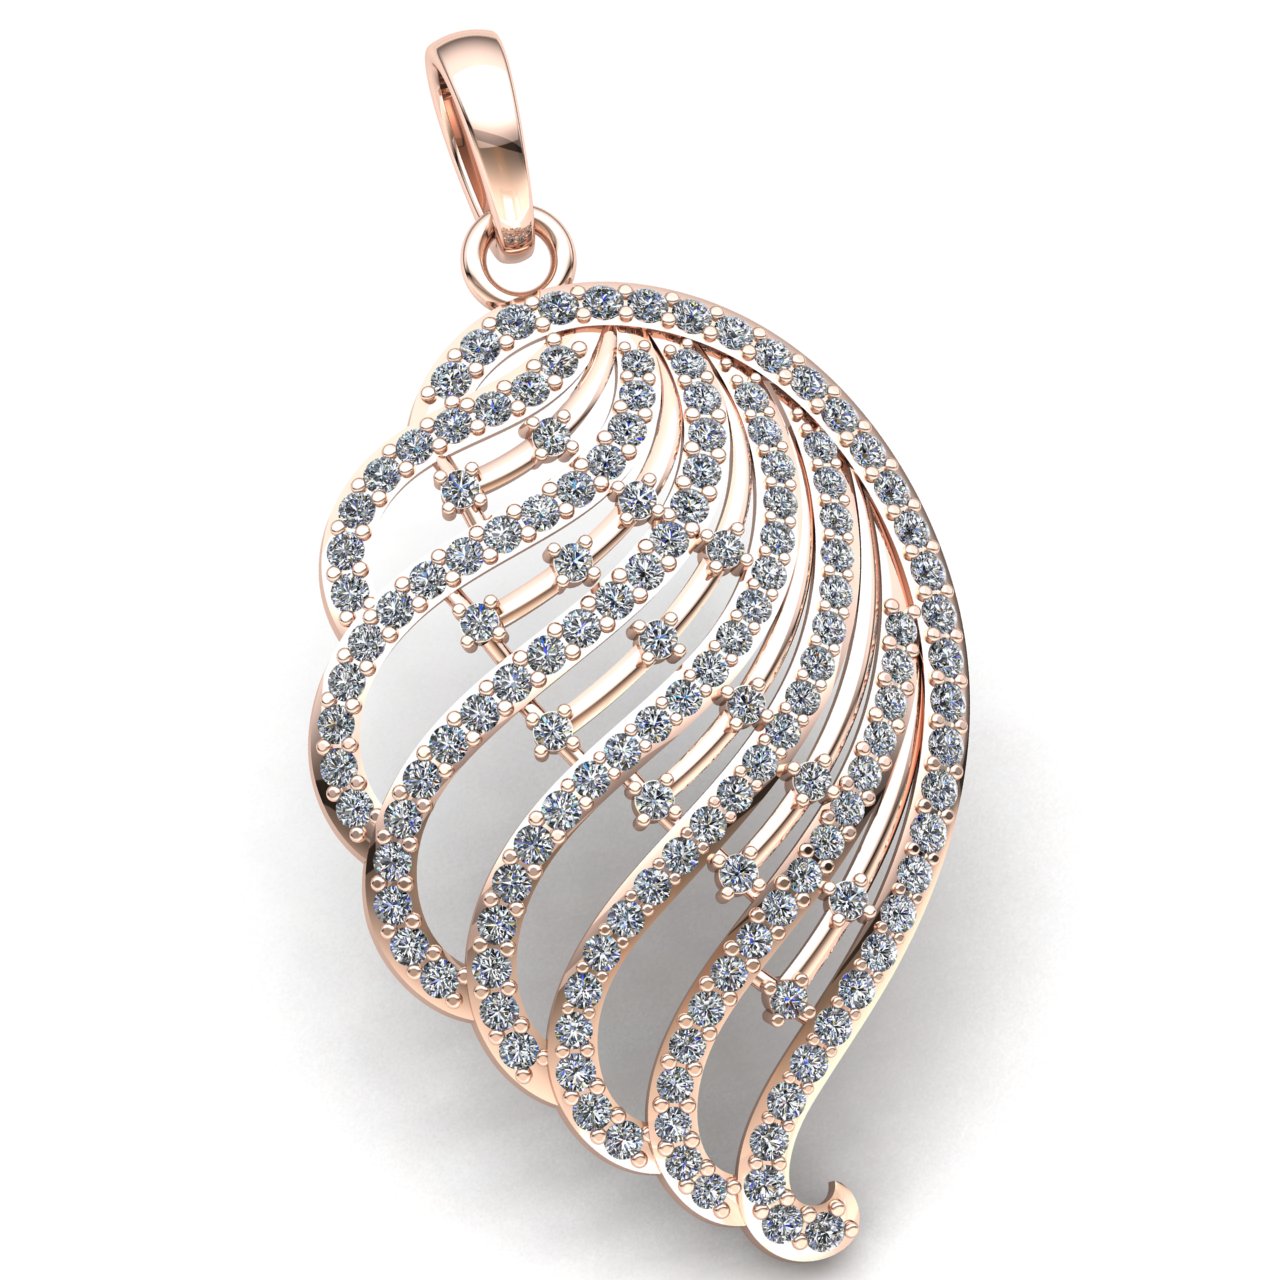 Jewel We Sell Genuine 8ct Round Cut Diamond Ladies Interwoven Pave Pendant Solid 10K Rose Gold GH SI1